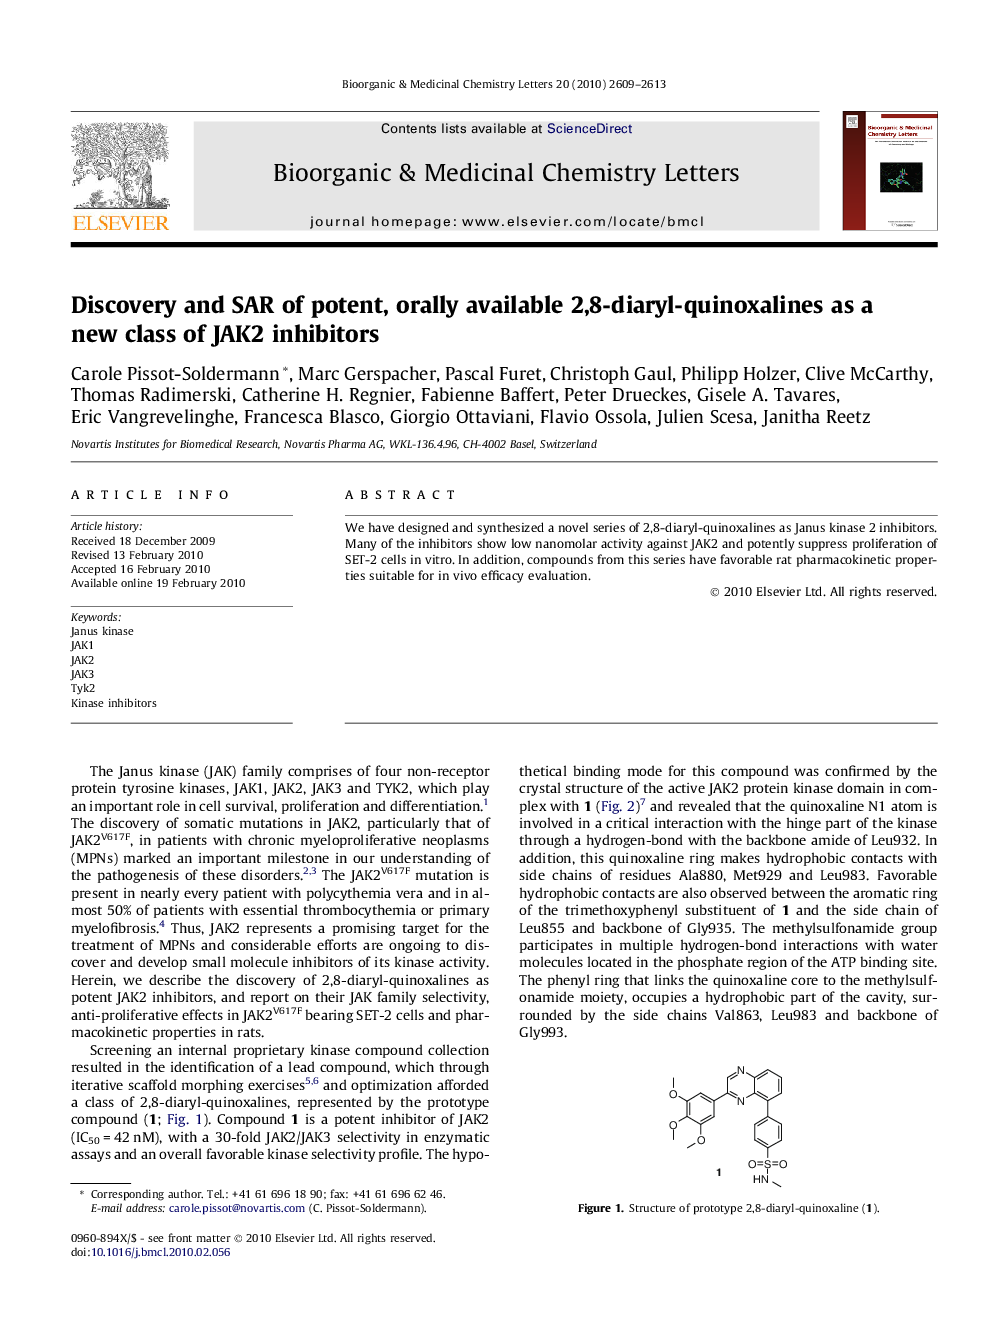 Discovery and SAR of potent, orally available 2,8-diaryl-quinoxalines as a new class of JAK2 inhibitors